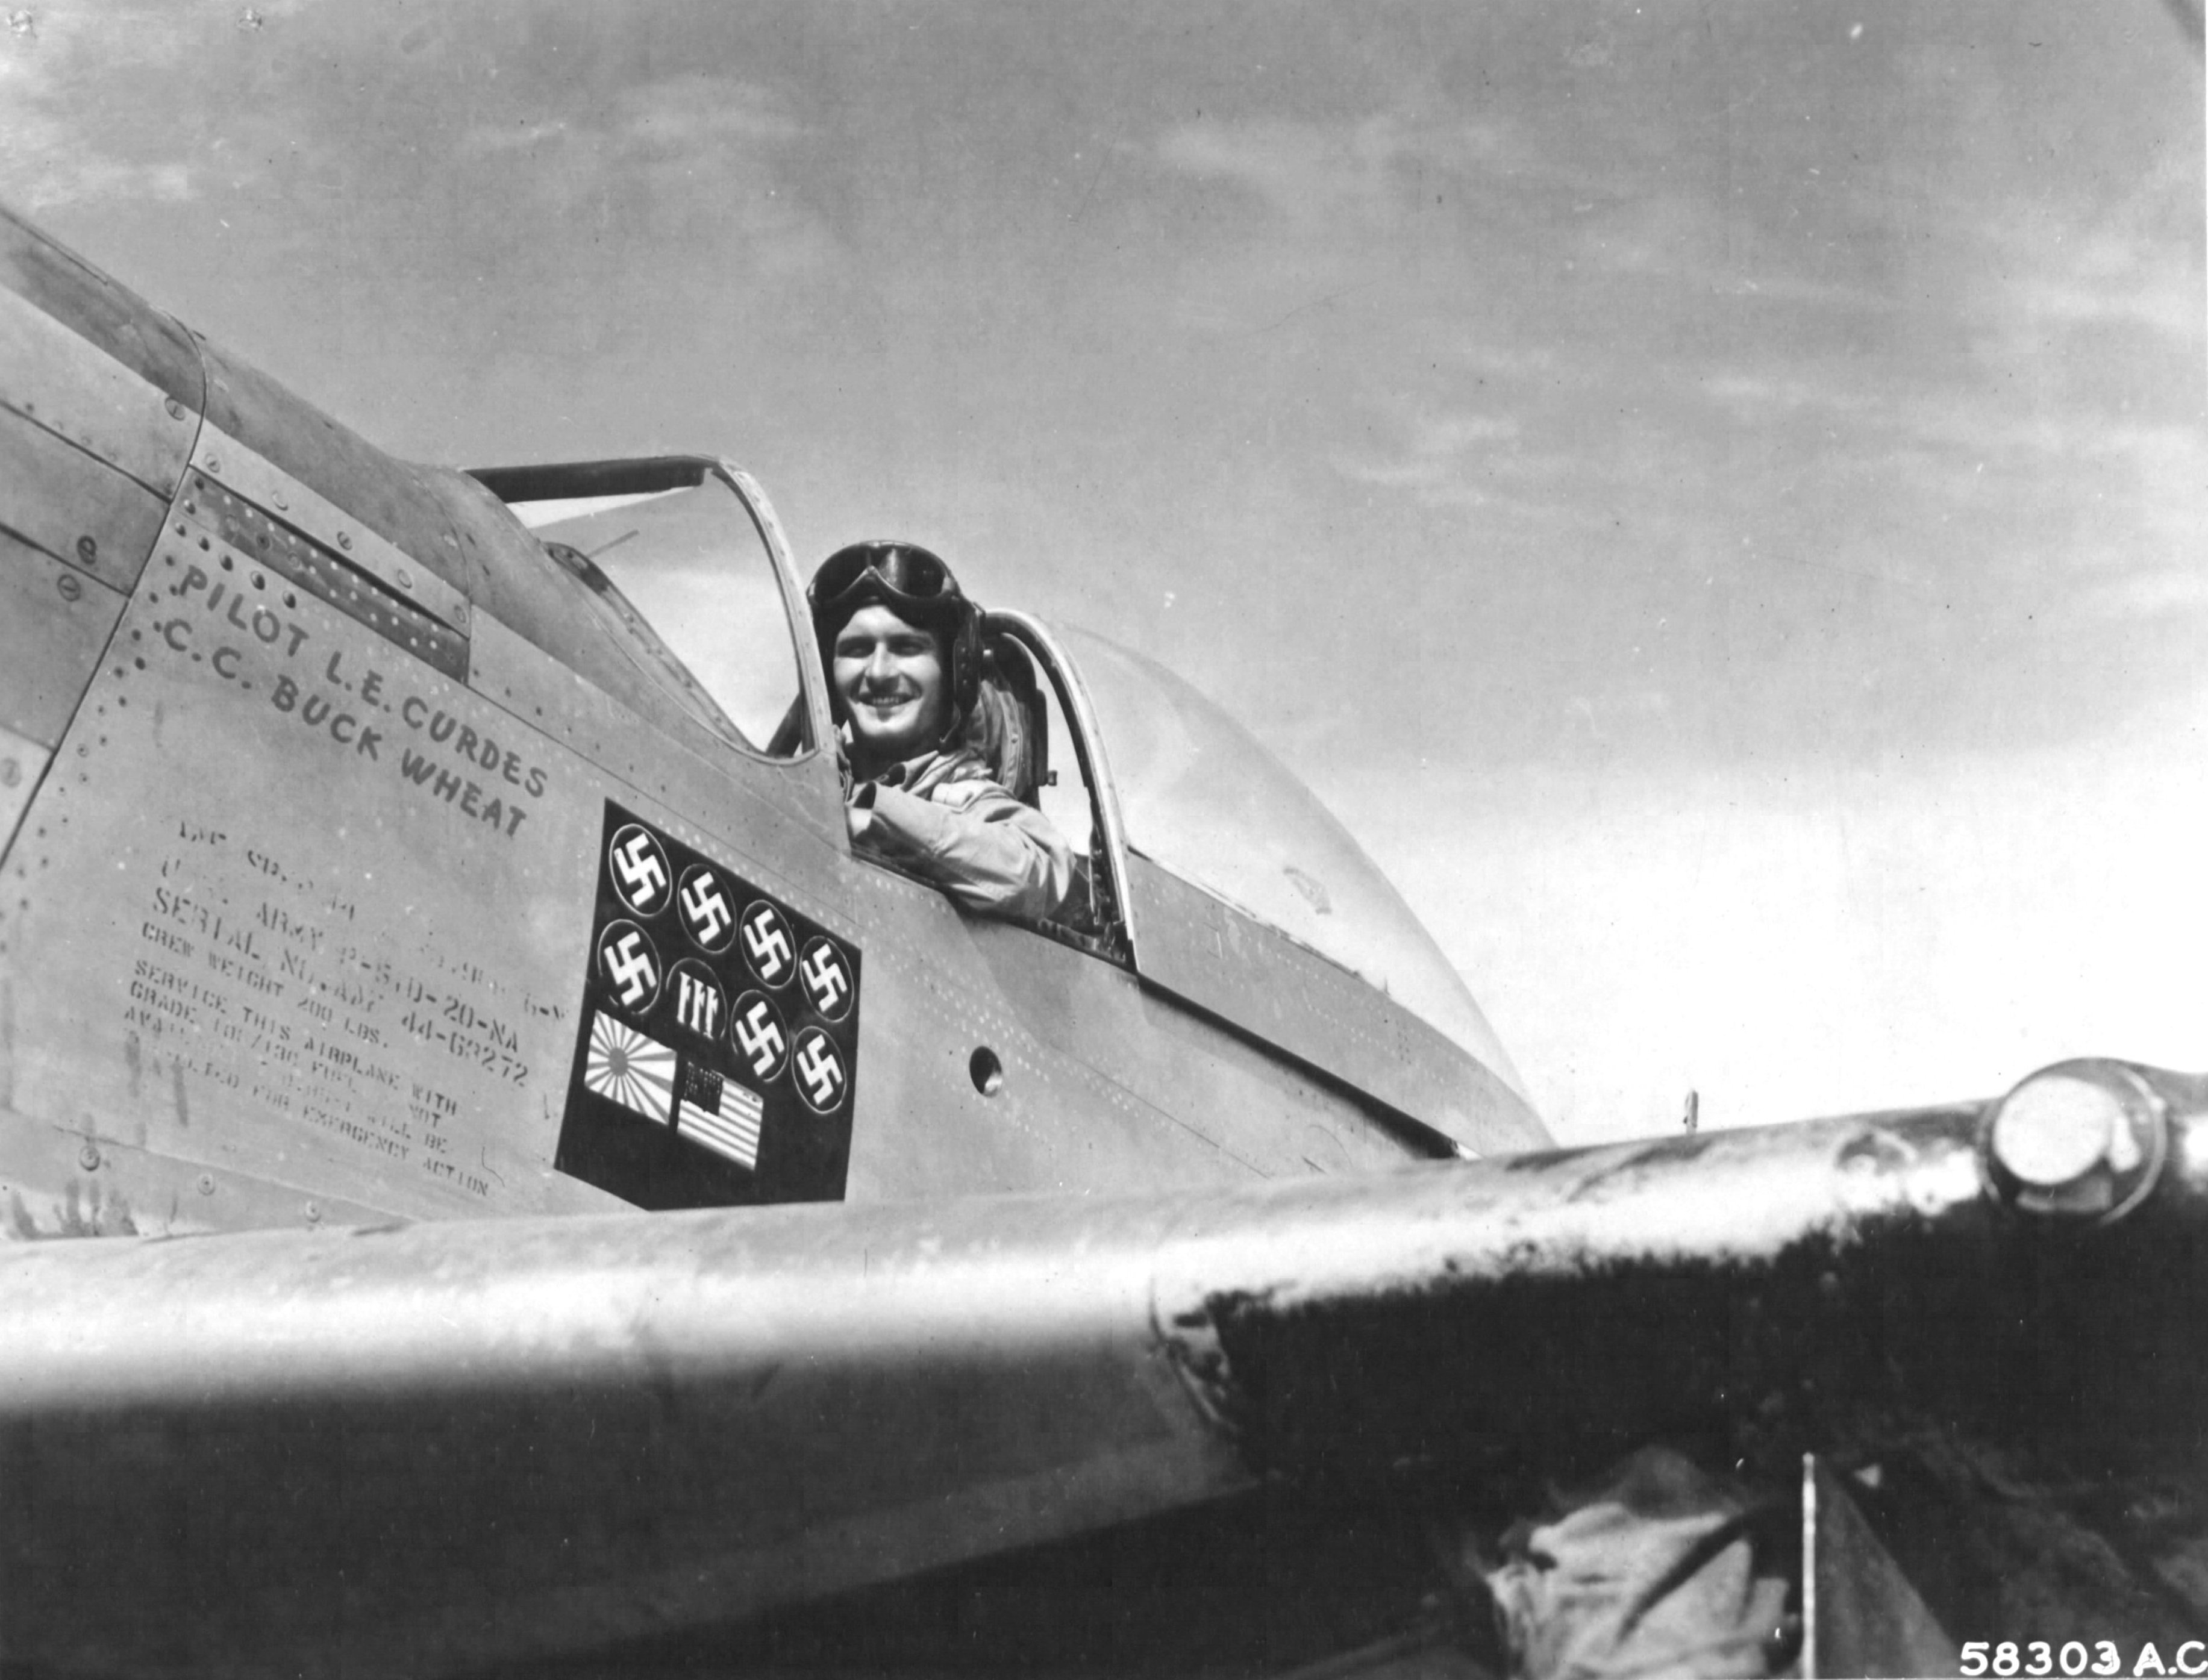 Capt Louis Curdes of the 4th Fighter Squadron and his P-51D Mustang “Bad Angel”. Note the interesting scoreboard. See Comment.